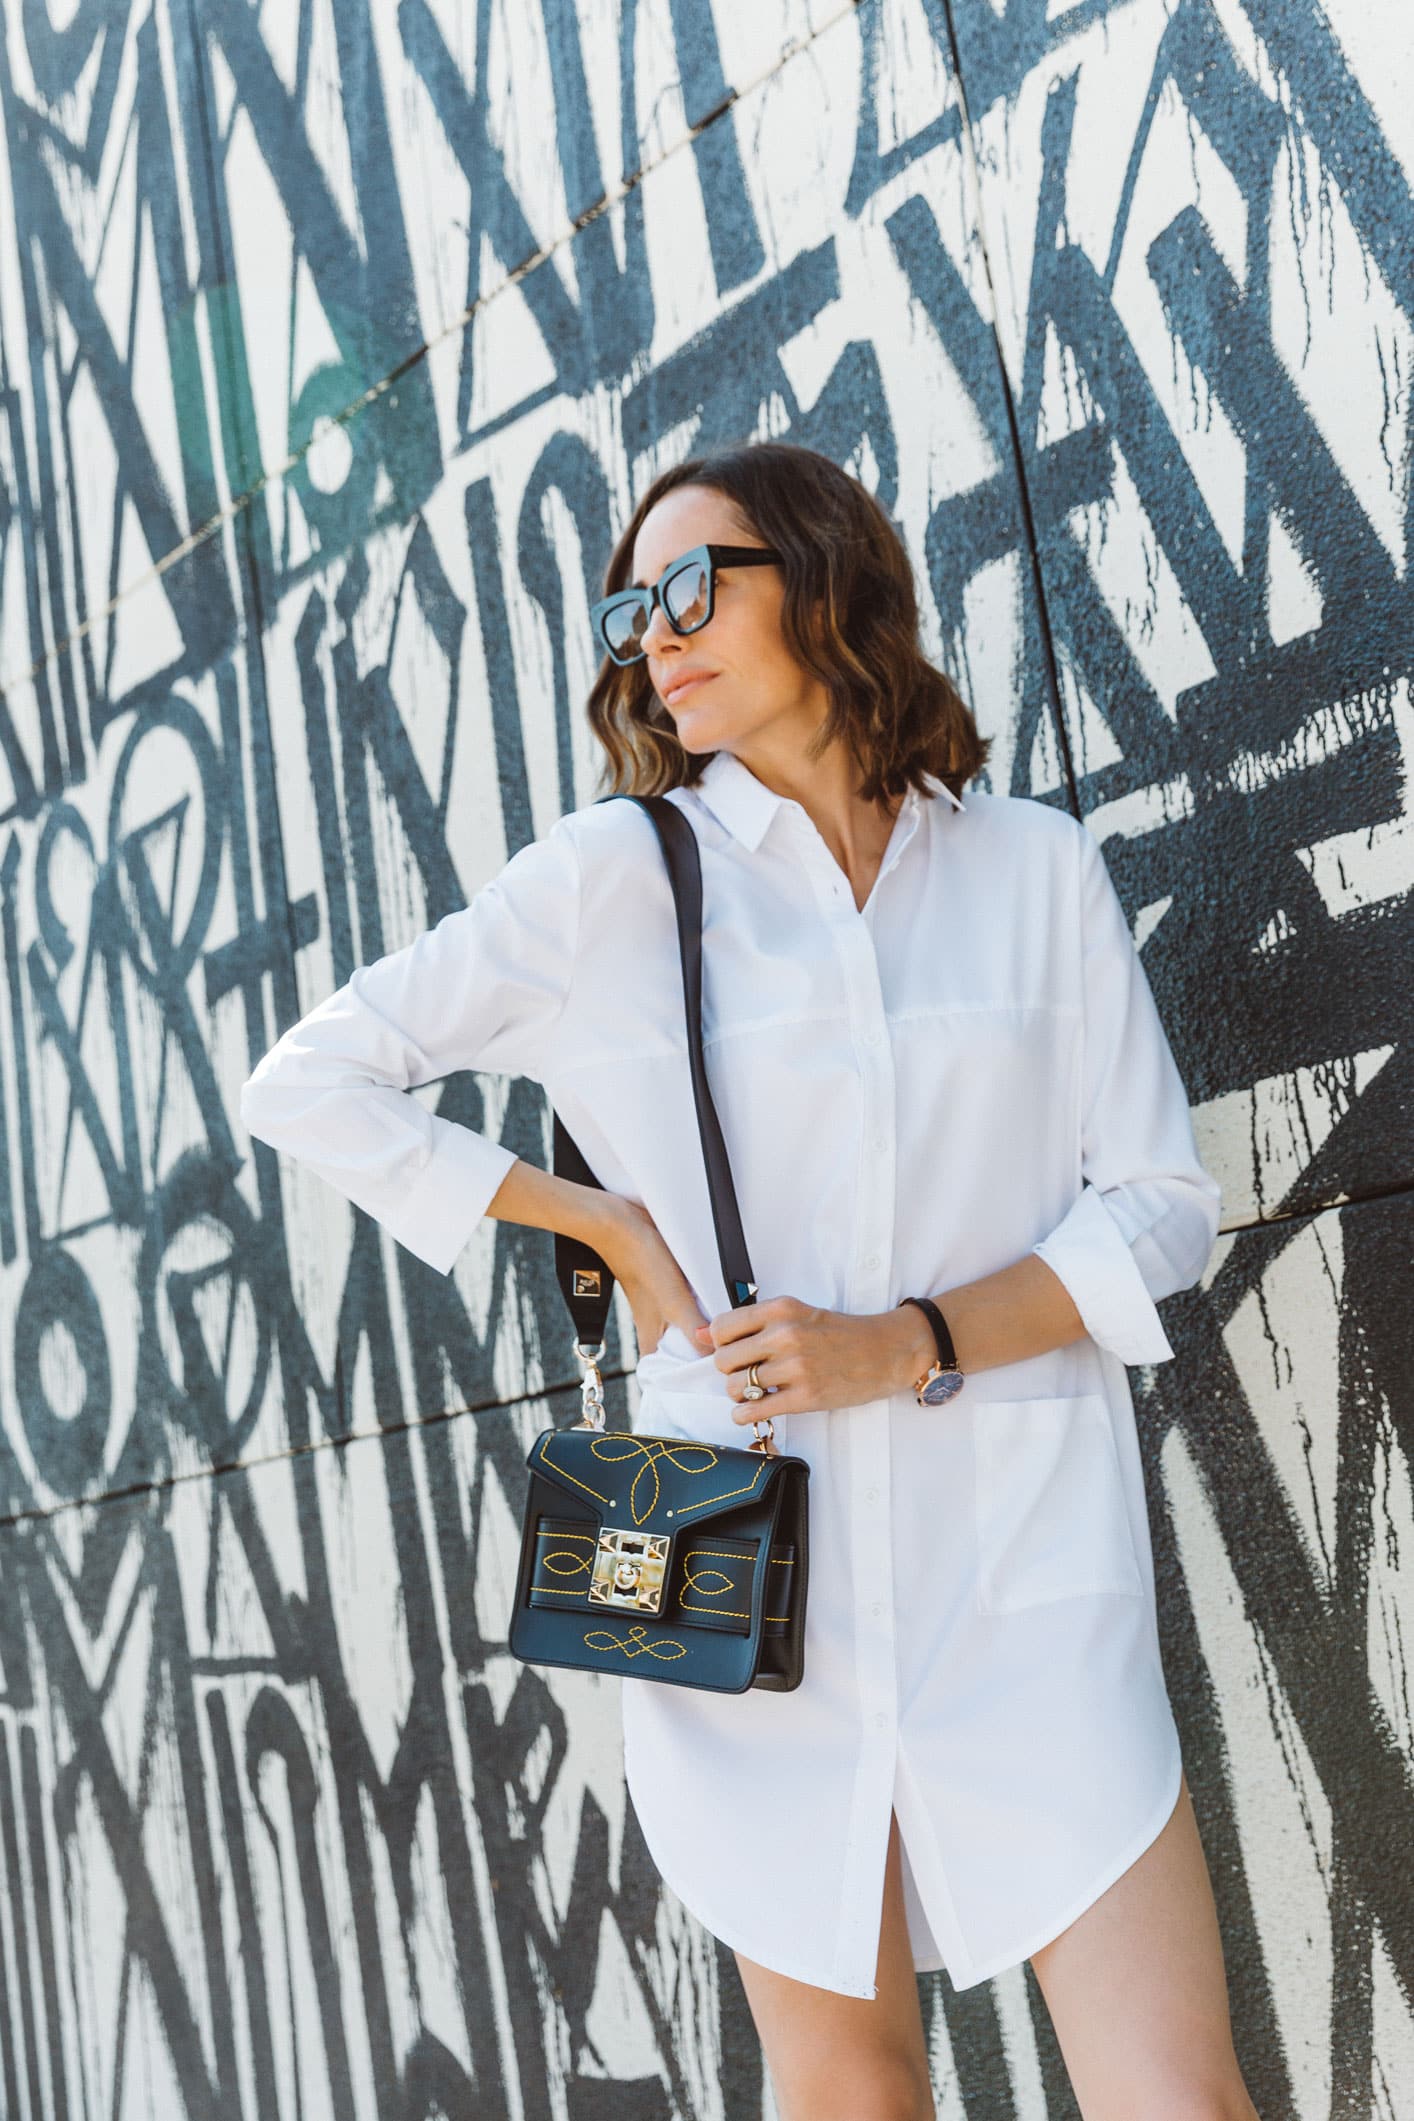 Louise Roe on the psychology of fashion wearing a white shirt dress